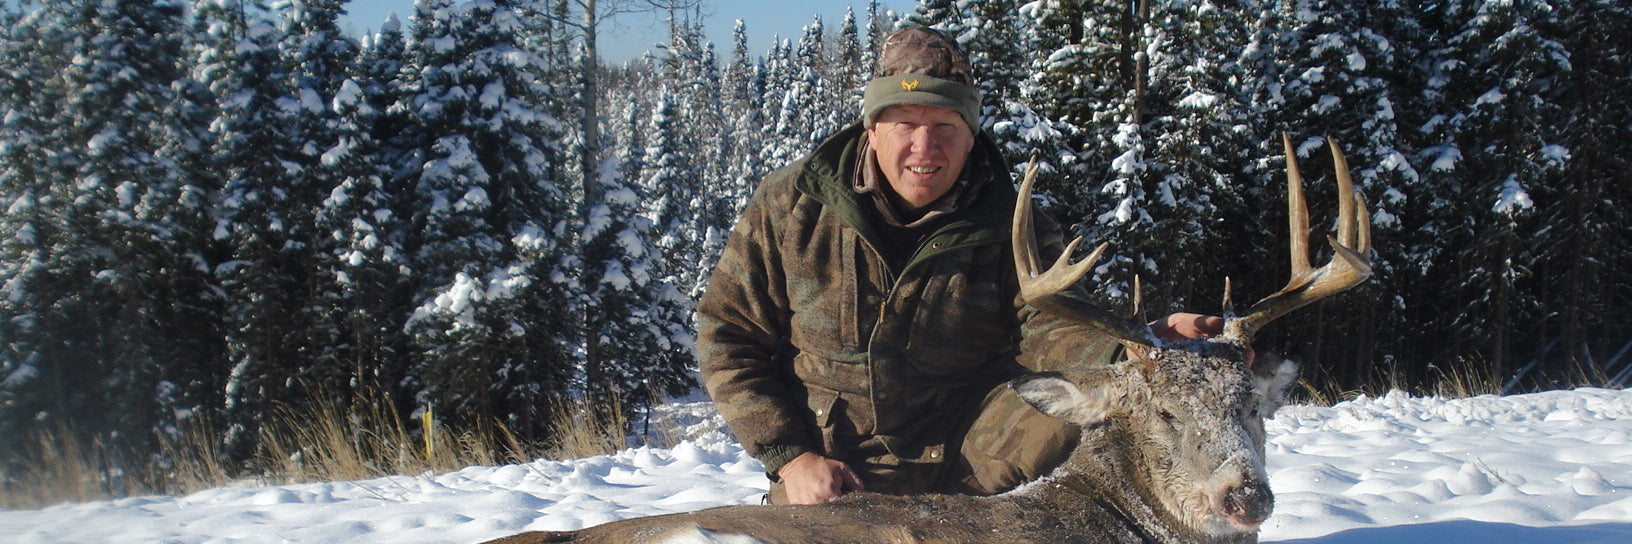 Beautiful Trophy Whitetail Deer in the foothills of the Rockies during the rut in November